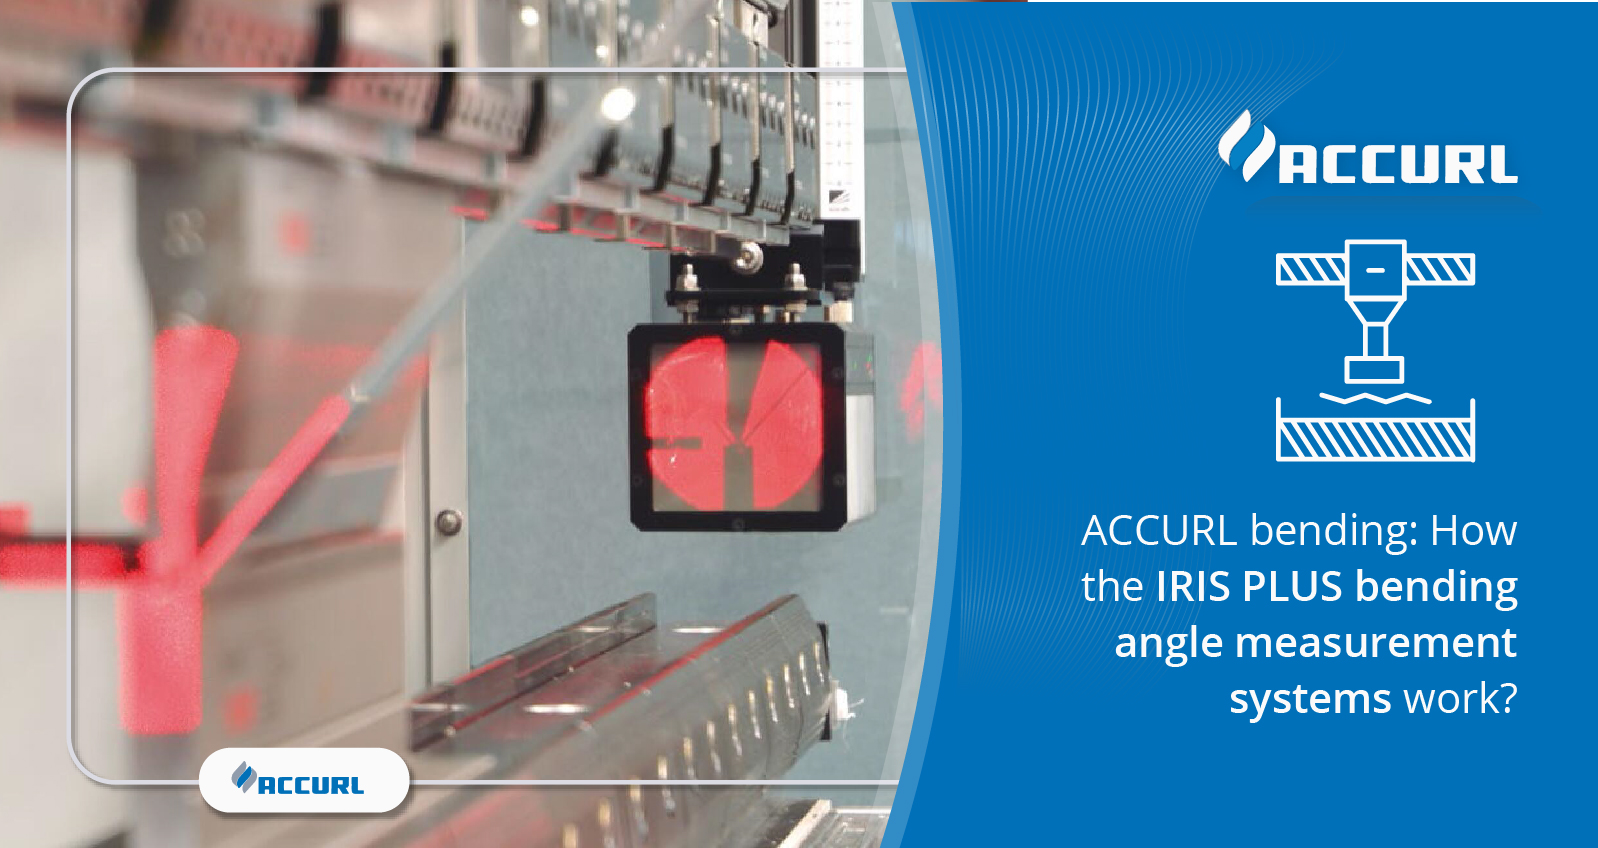 ACCURL bending-How the IRIS PLUS bending angle measurement systems work